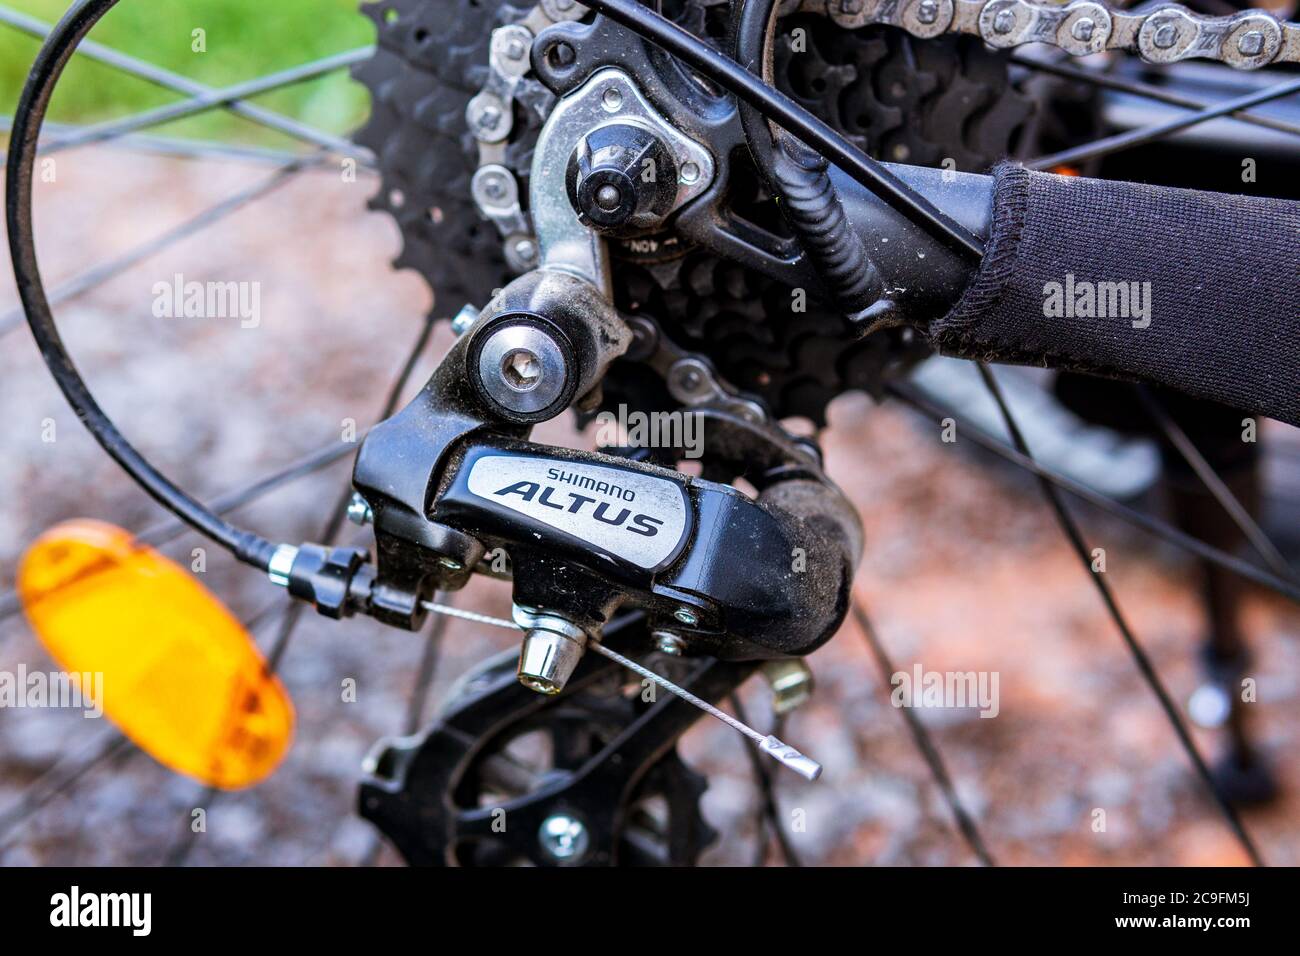 Tyumen, Russia-July 29, 2020: Rear derailleur for Shimano altus bike.  Shimano is a Japanese company, one of the world largest manufacturers of  Bicycle Stock Photo - Alamy